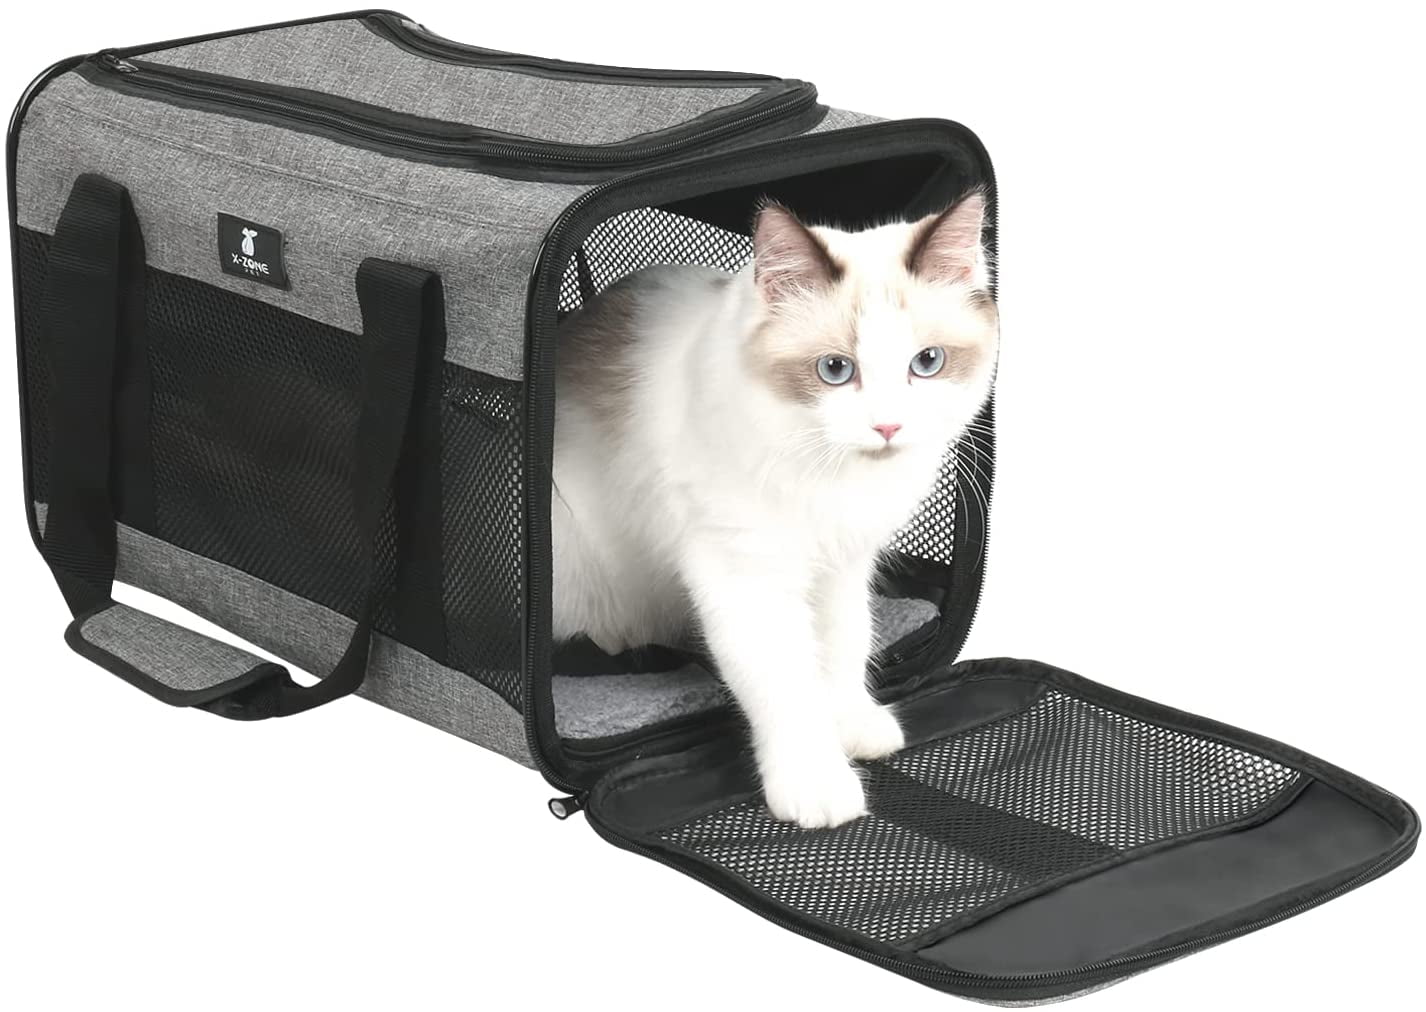 X-ZONE PET Airline Approved Pet Carriers,Soft Sided Collapsible Pet Travel Carrier for Medium Puppy and Cats 